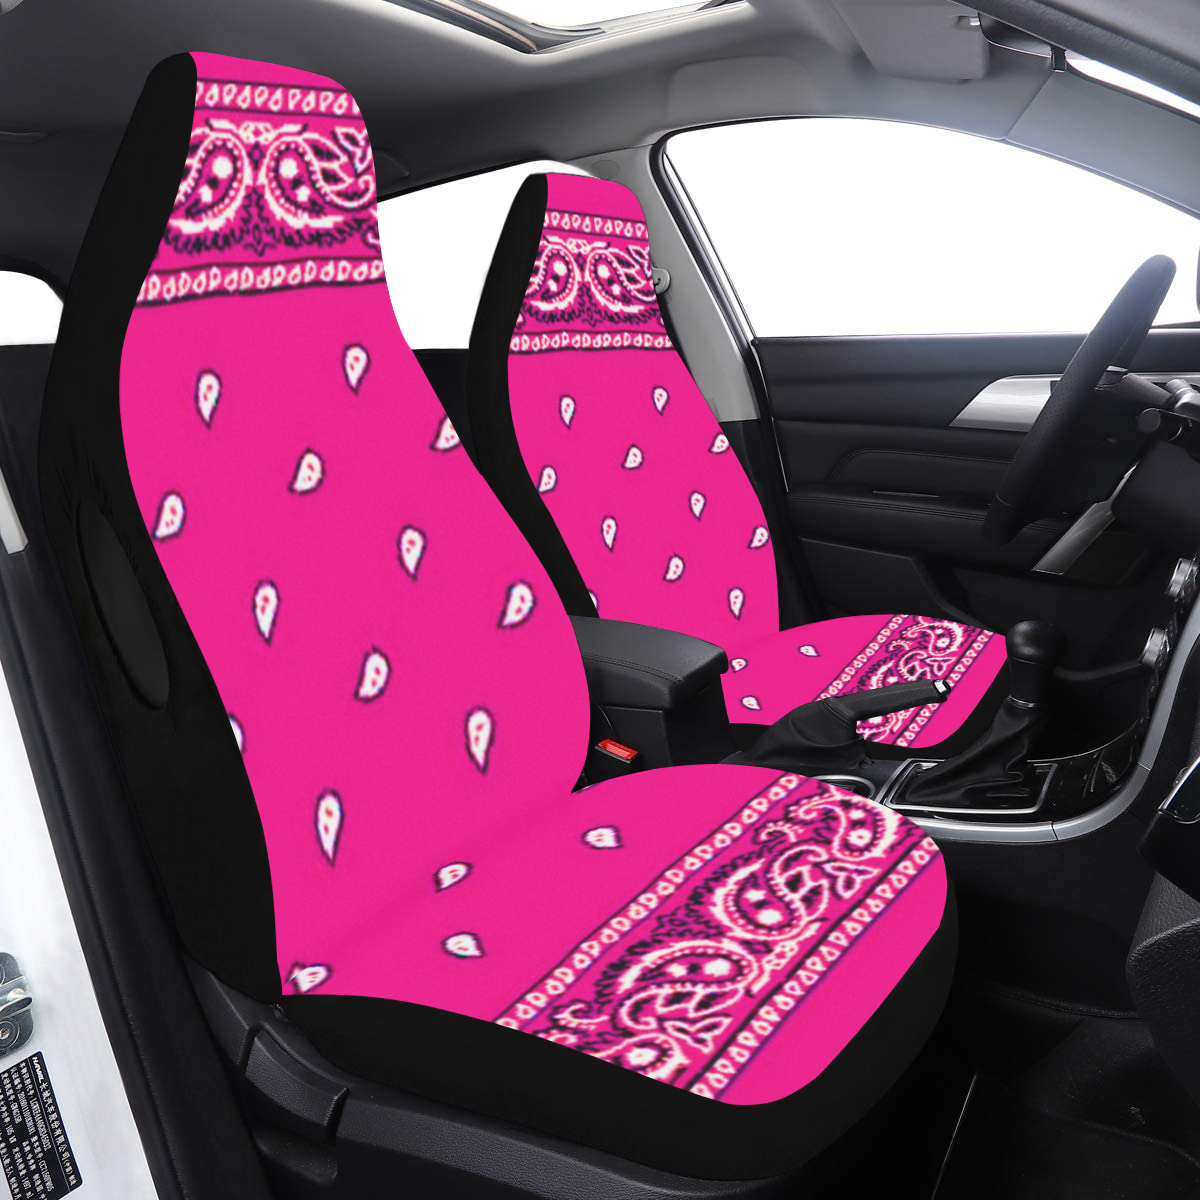 KERCHIEF PATTERN PINK Car Seat Cover Airbag Compatible (Set of 2)